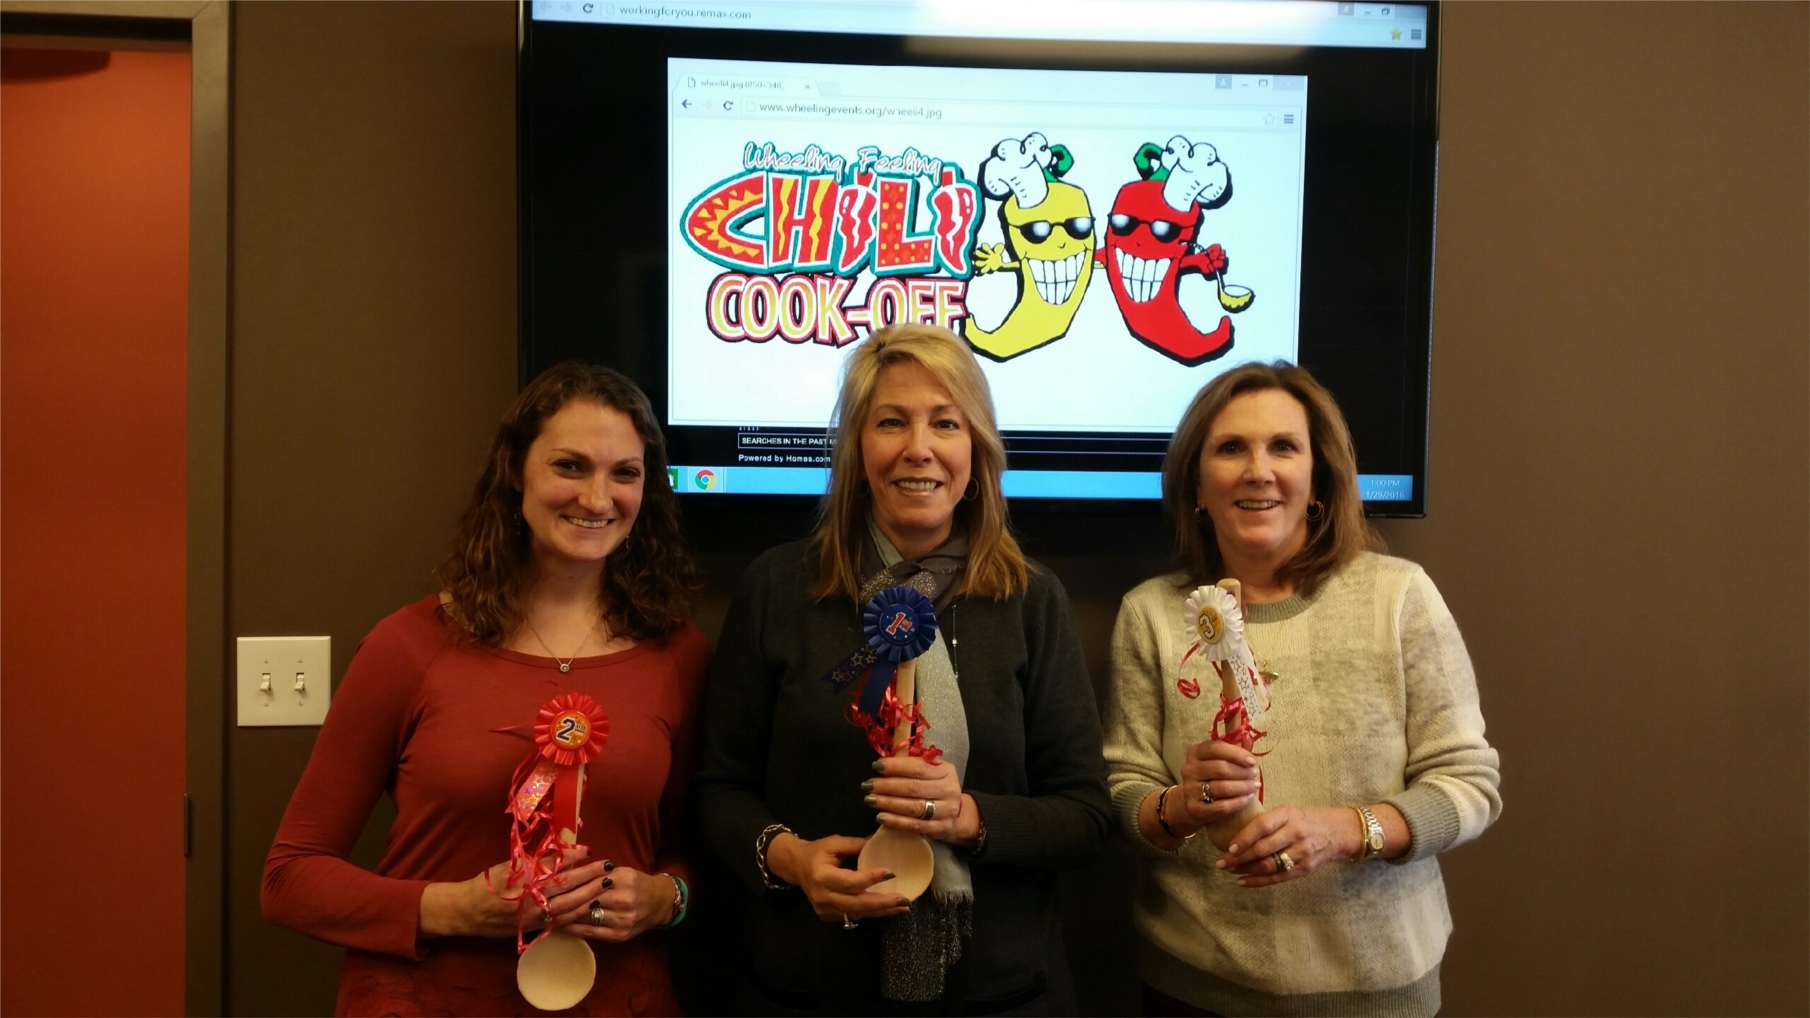 Winners of our semi-annual "Fun Day at Work" Chili Cook-off at our Beachwood Office.